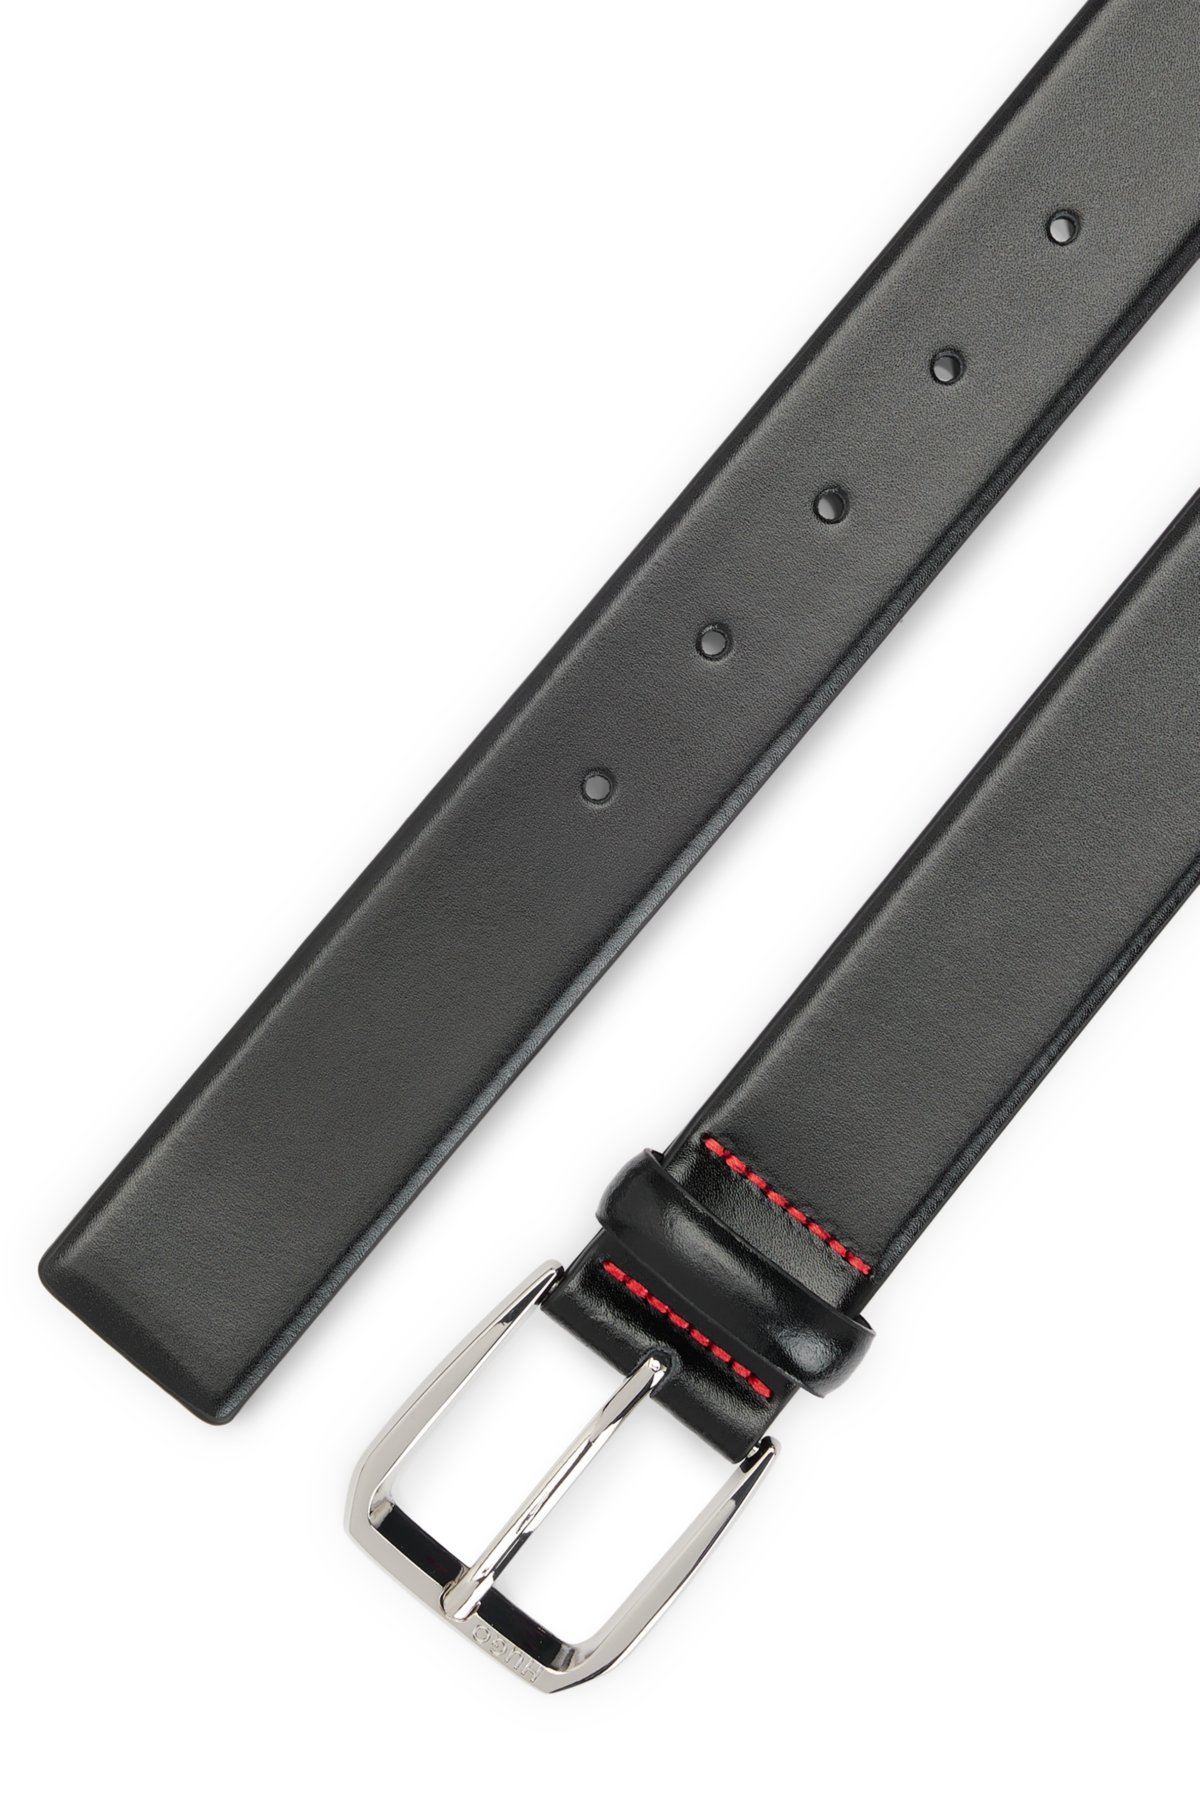 Italian-leather belt with branded buckle, Black